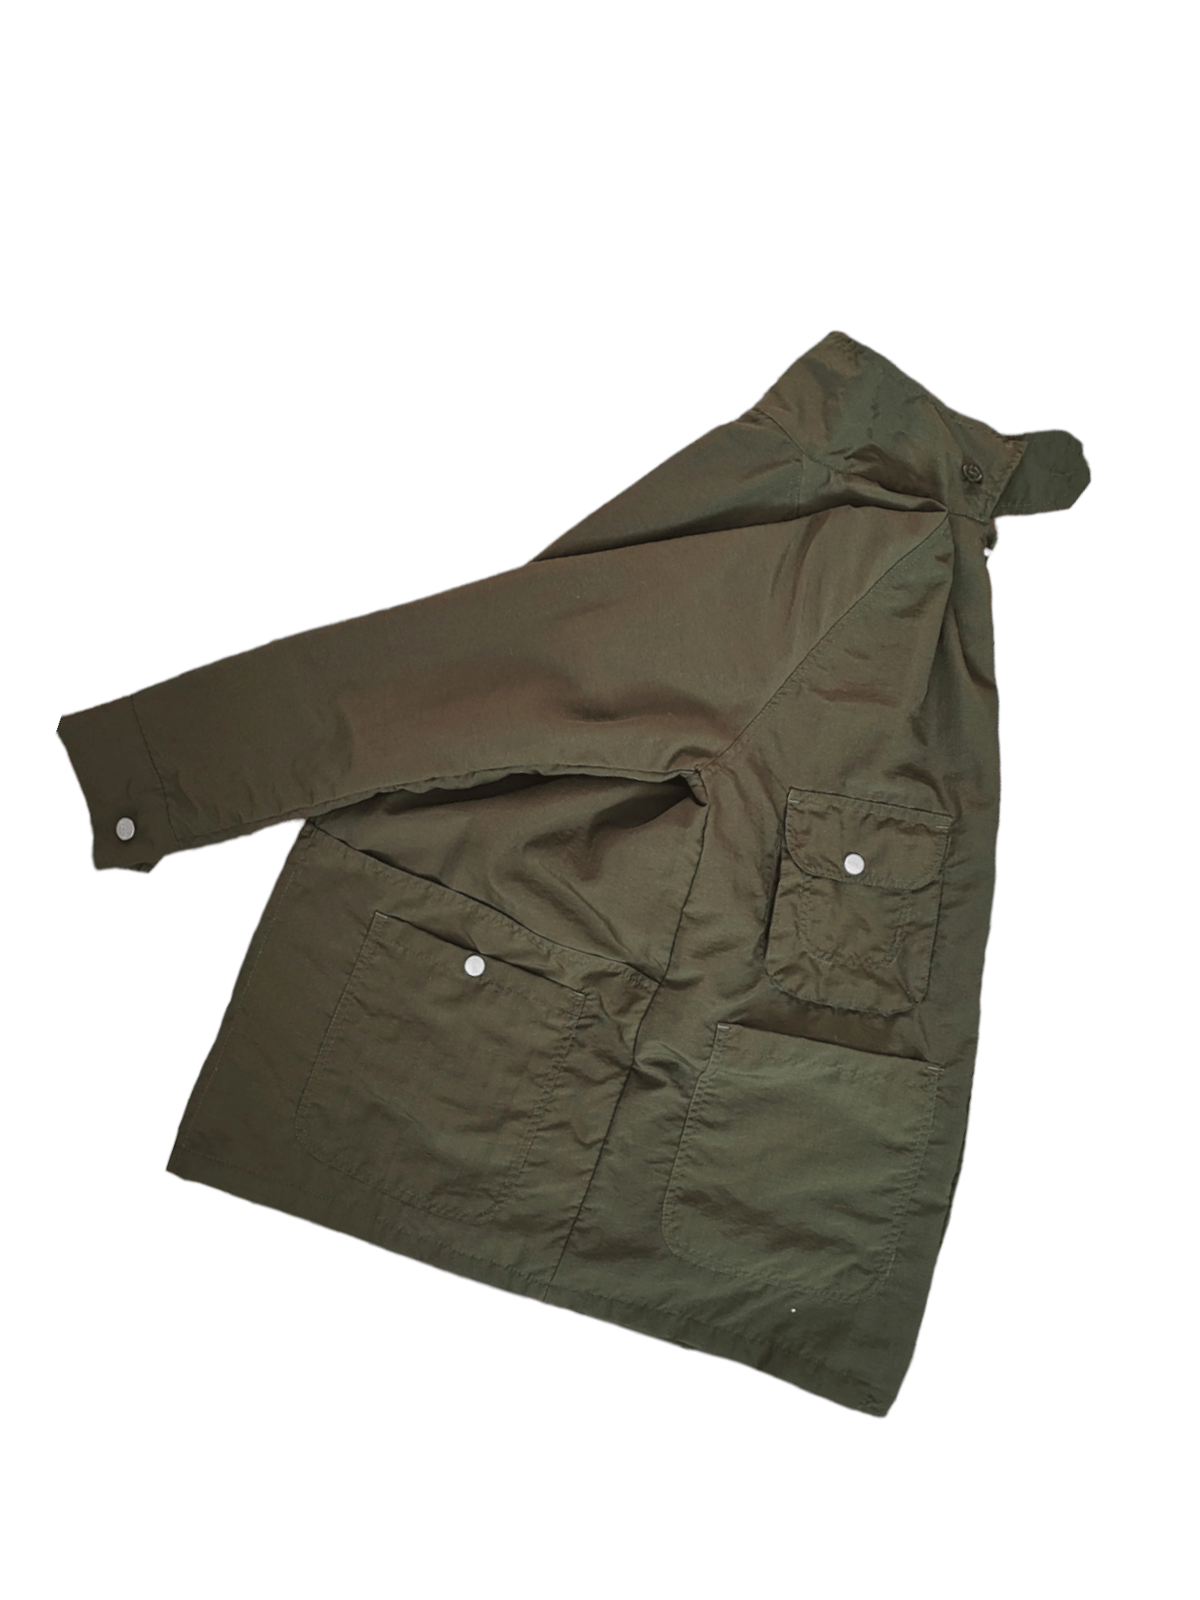 Image of Everyday Garments "Connaught" Chore Jackets 